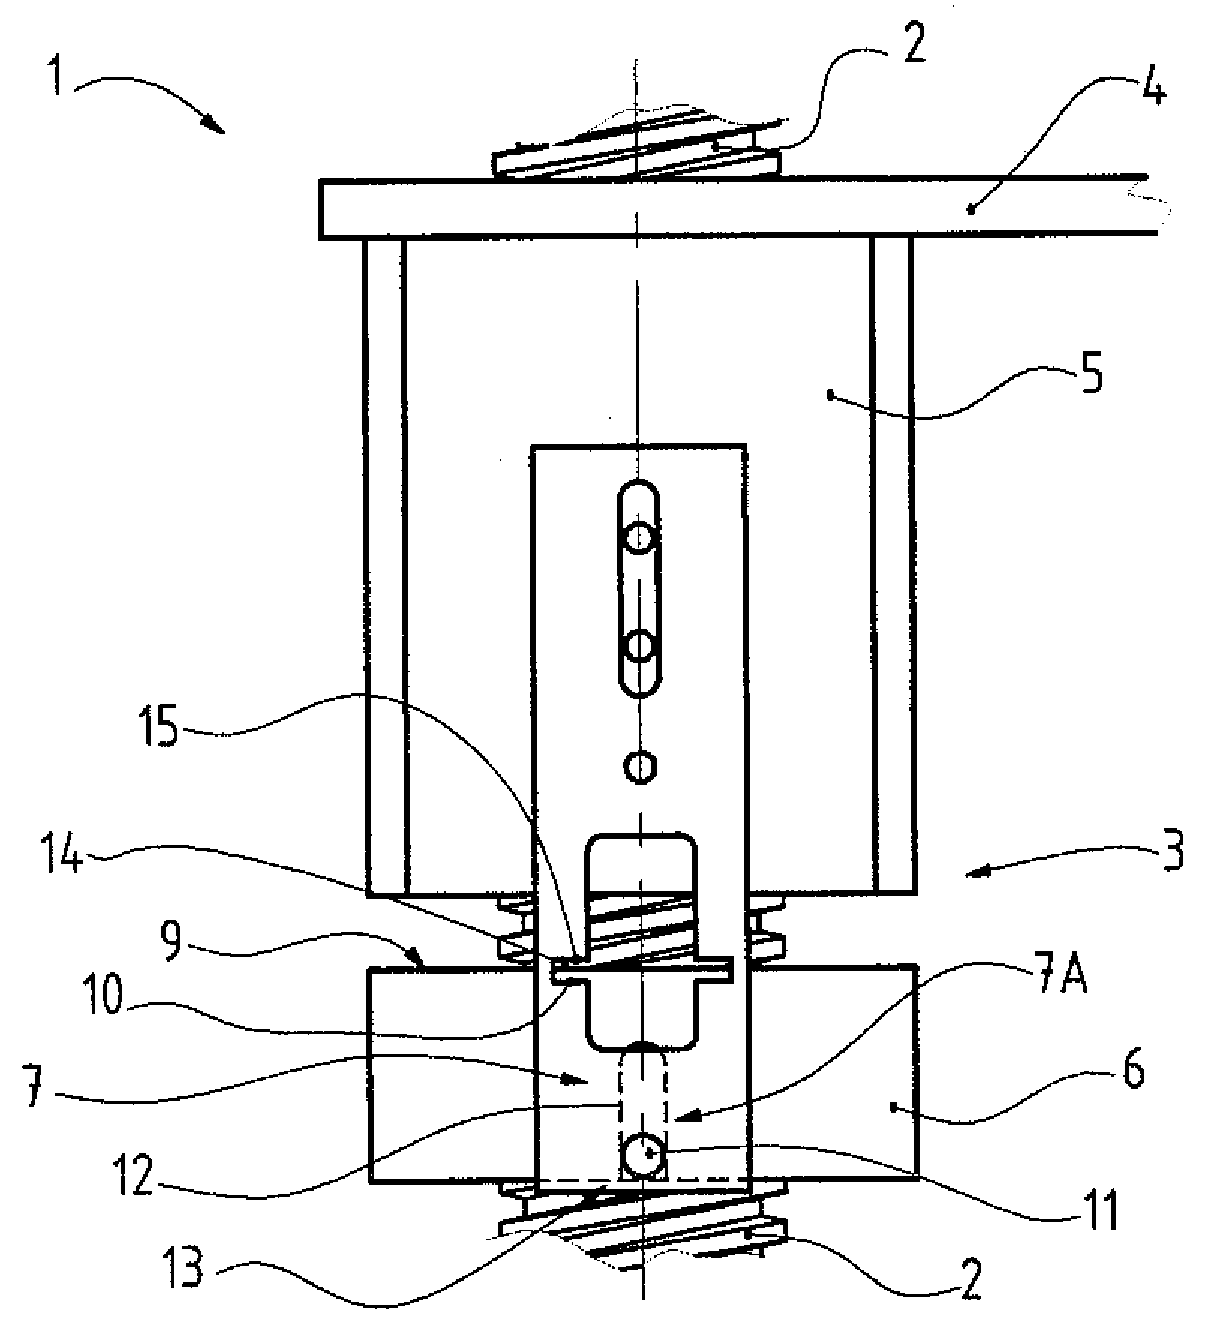 Hoisting device with a catch nut